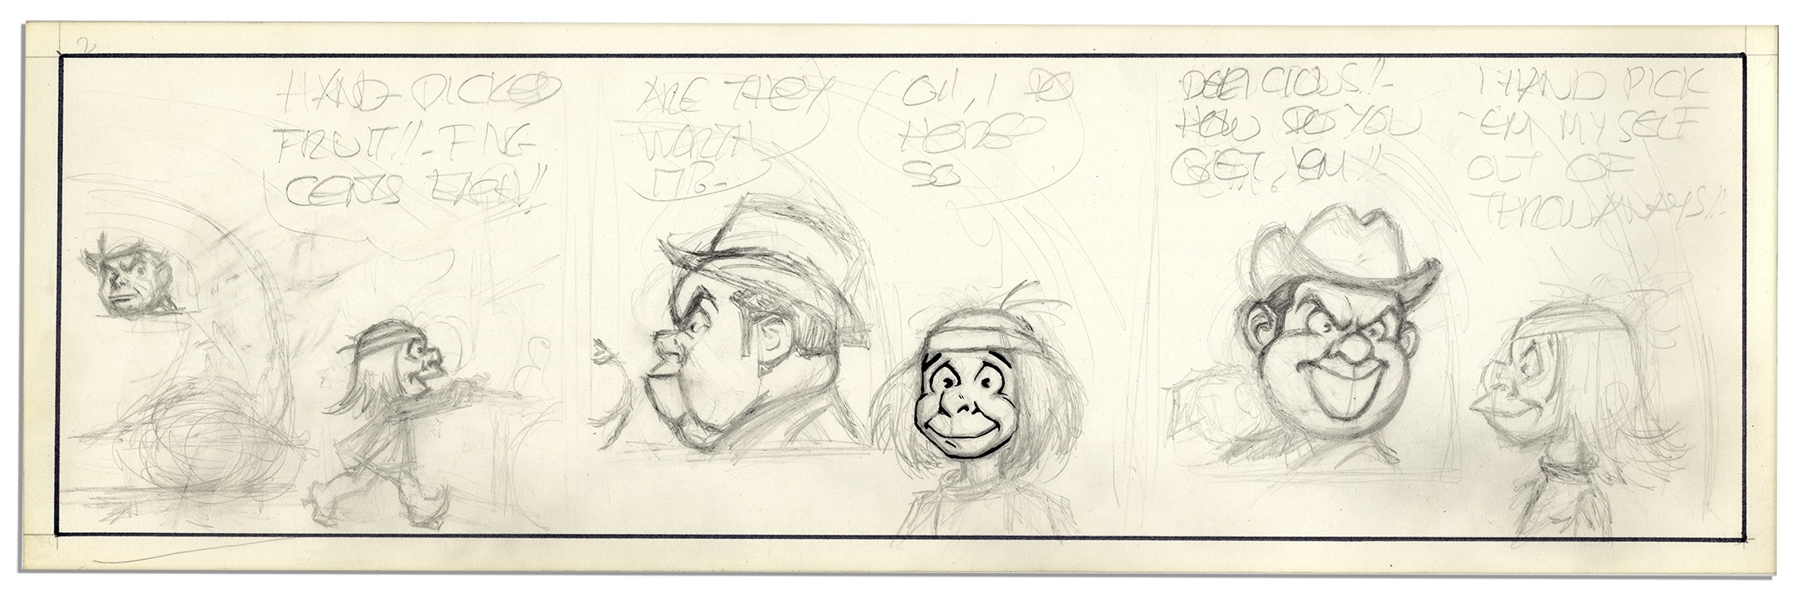 Unfinished Comic Strip by Al Capp in Pencil & Ink -- Undated -- 19.75'' x 6.25'' -- Minor Toning, Else Near Fine -- From the Al Capp Estate